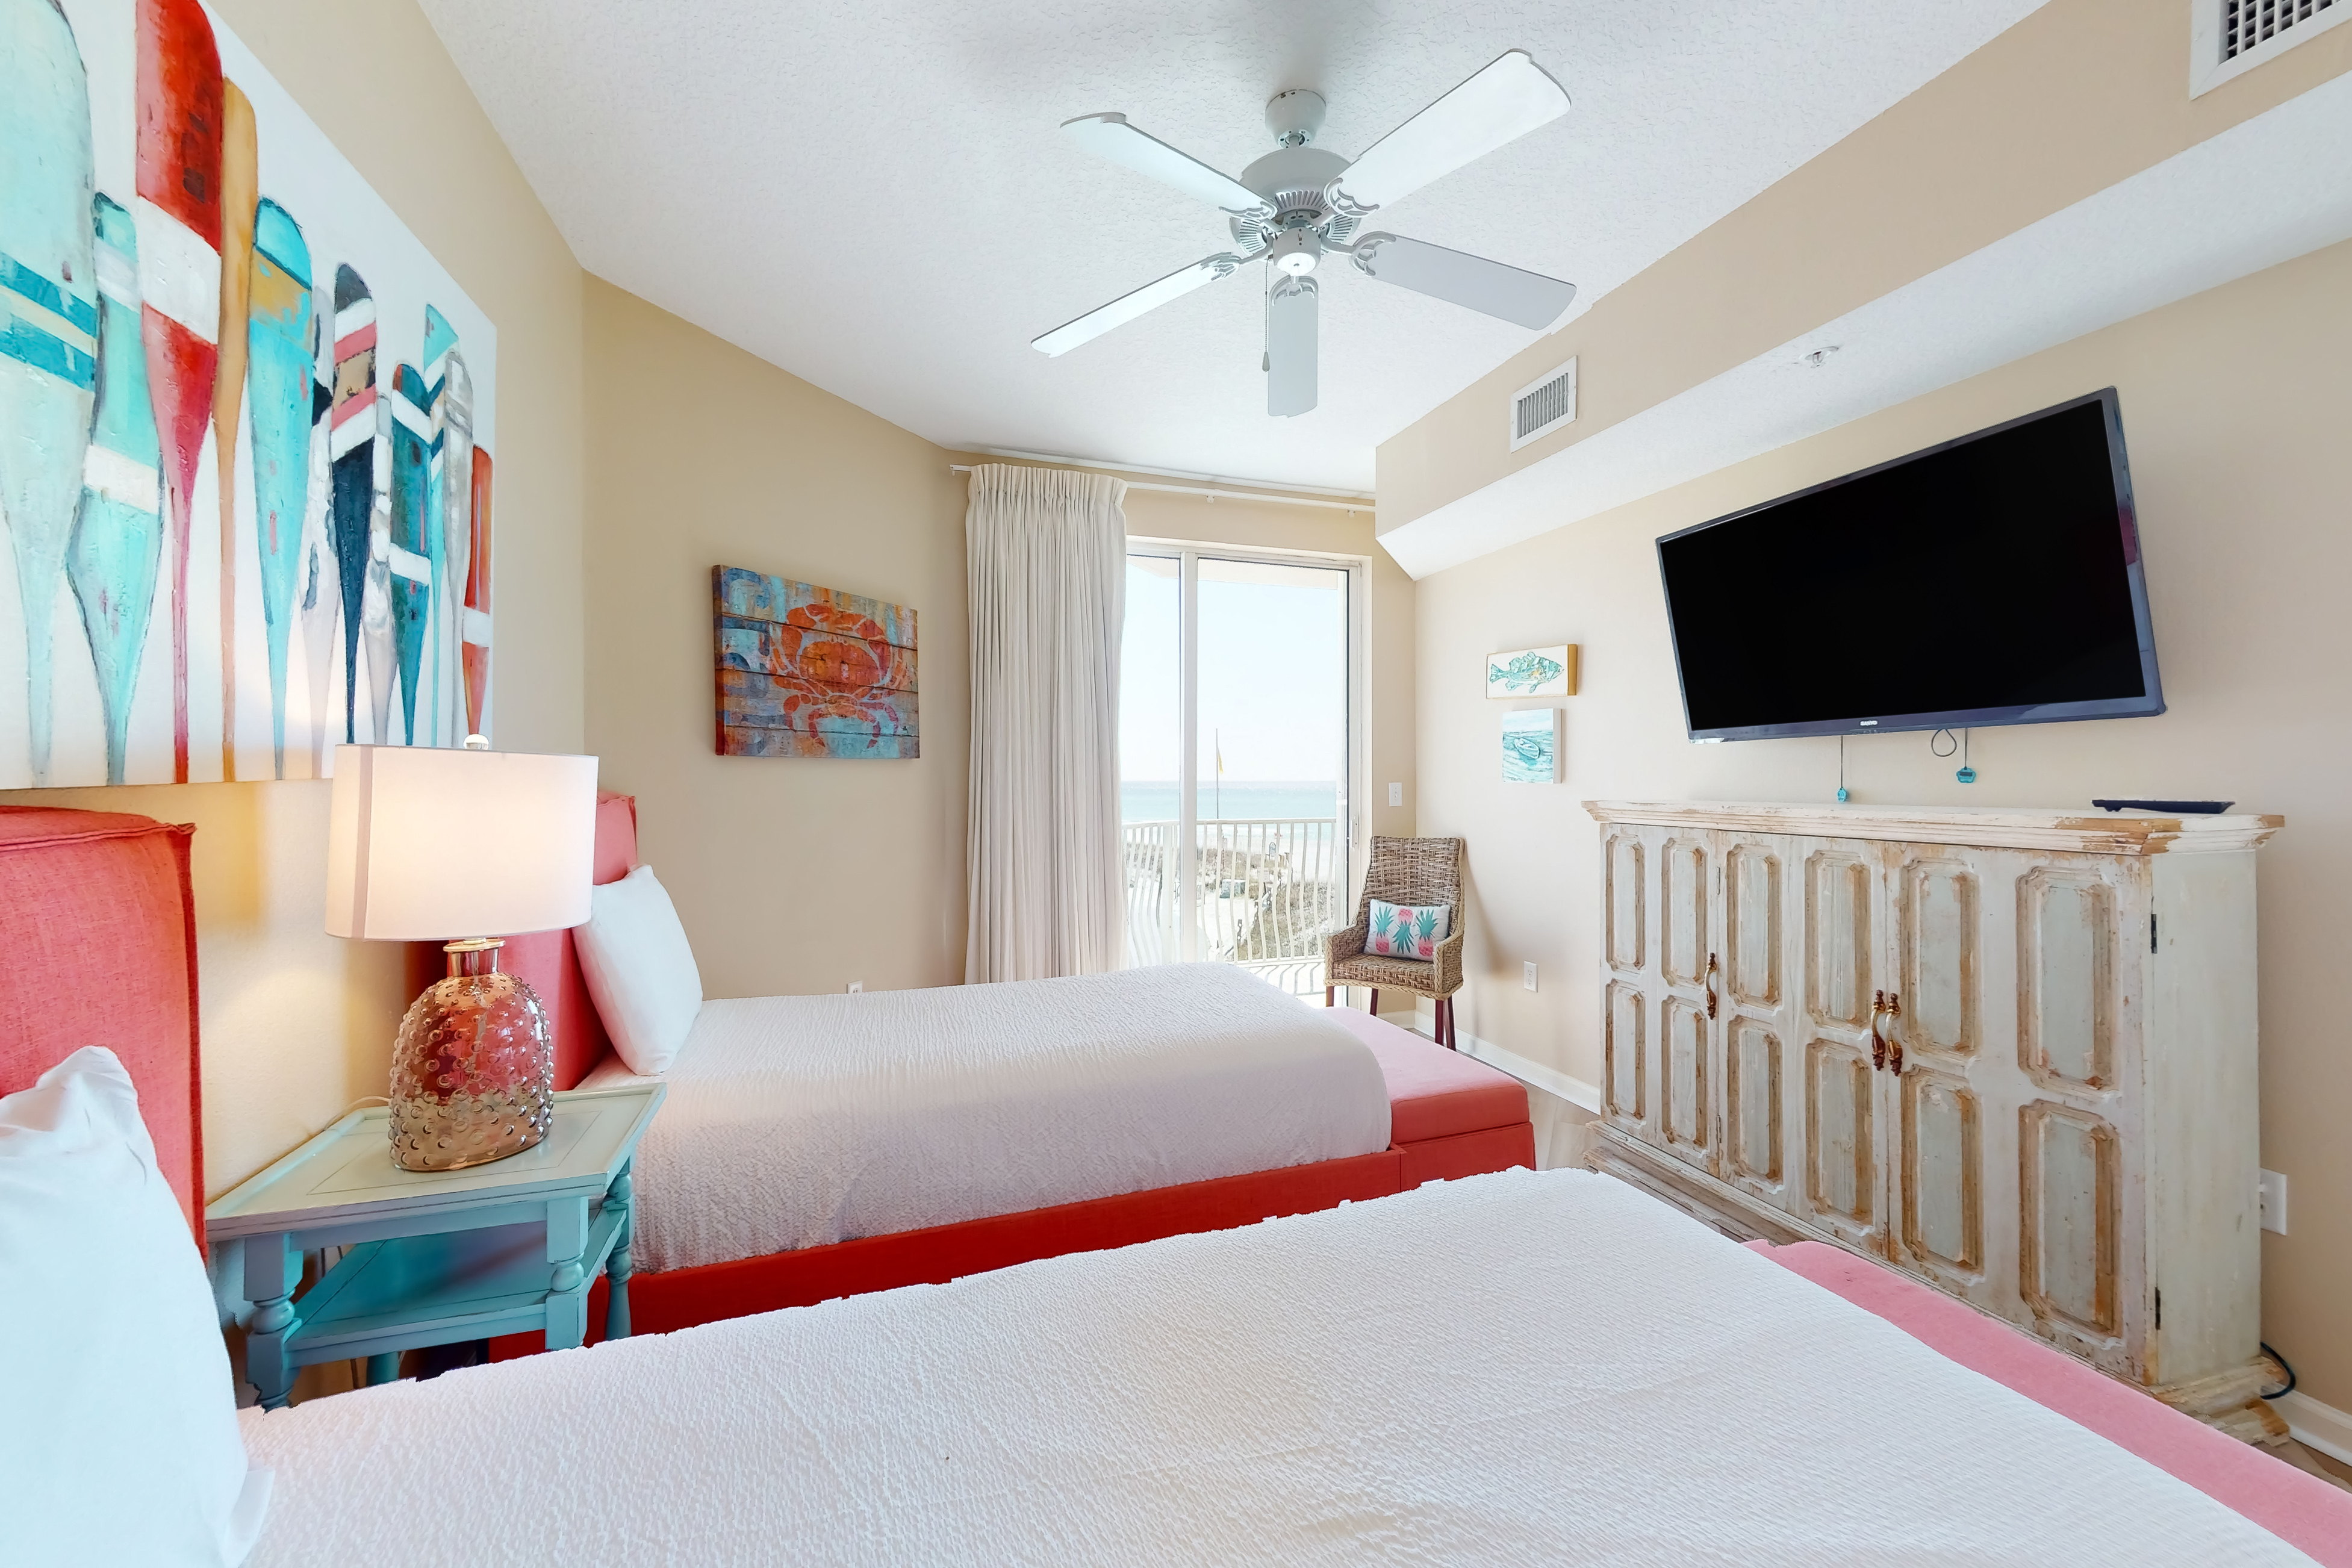 Dunes of Seagrove A209 Condo rental in Dunes of Seagrove in Highway 30-A Florida - #23